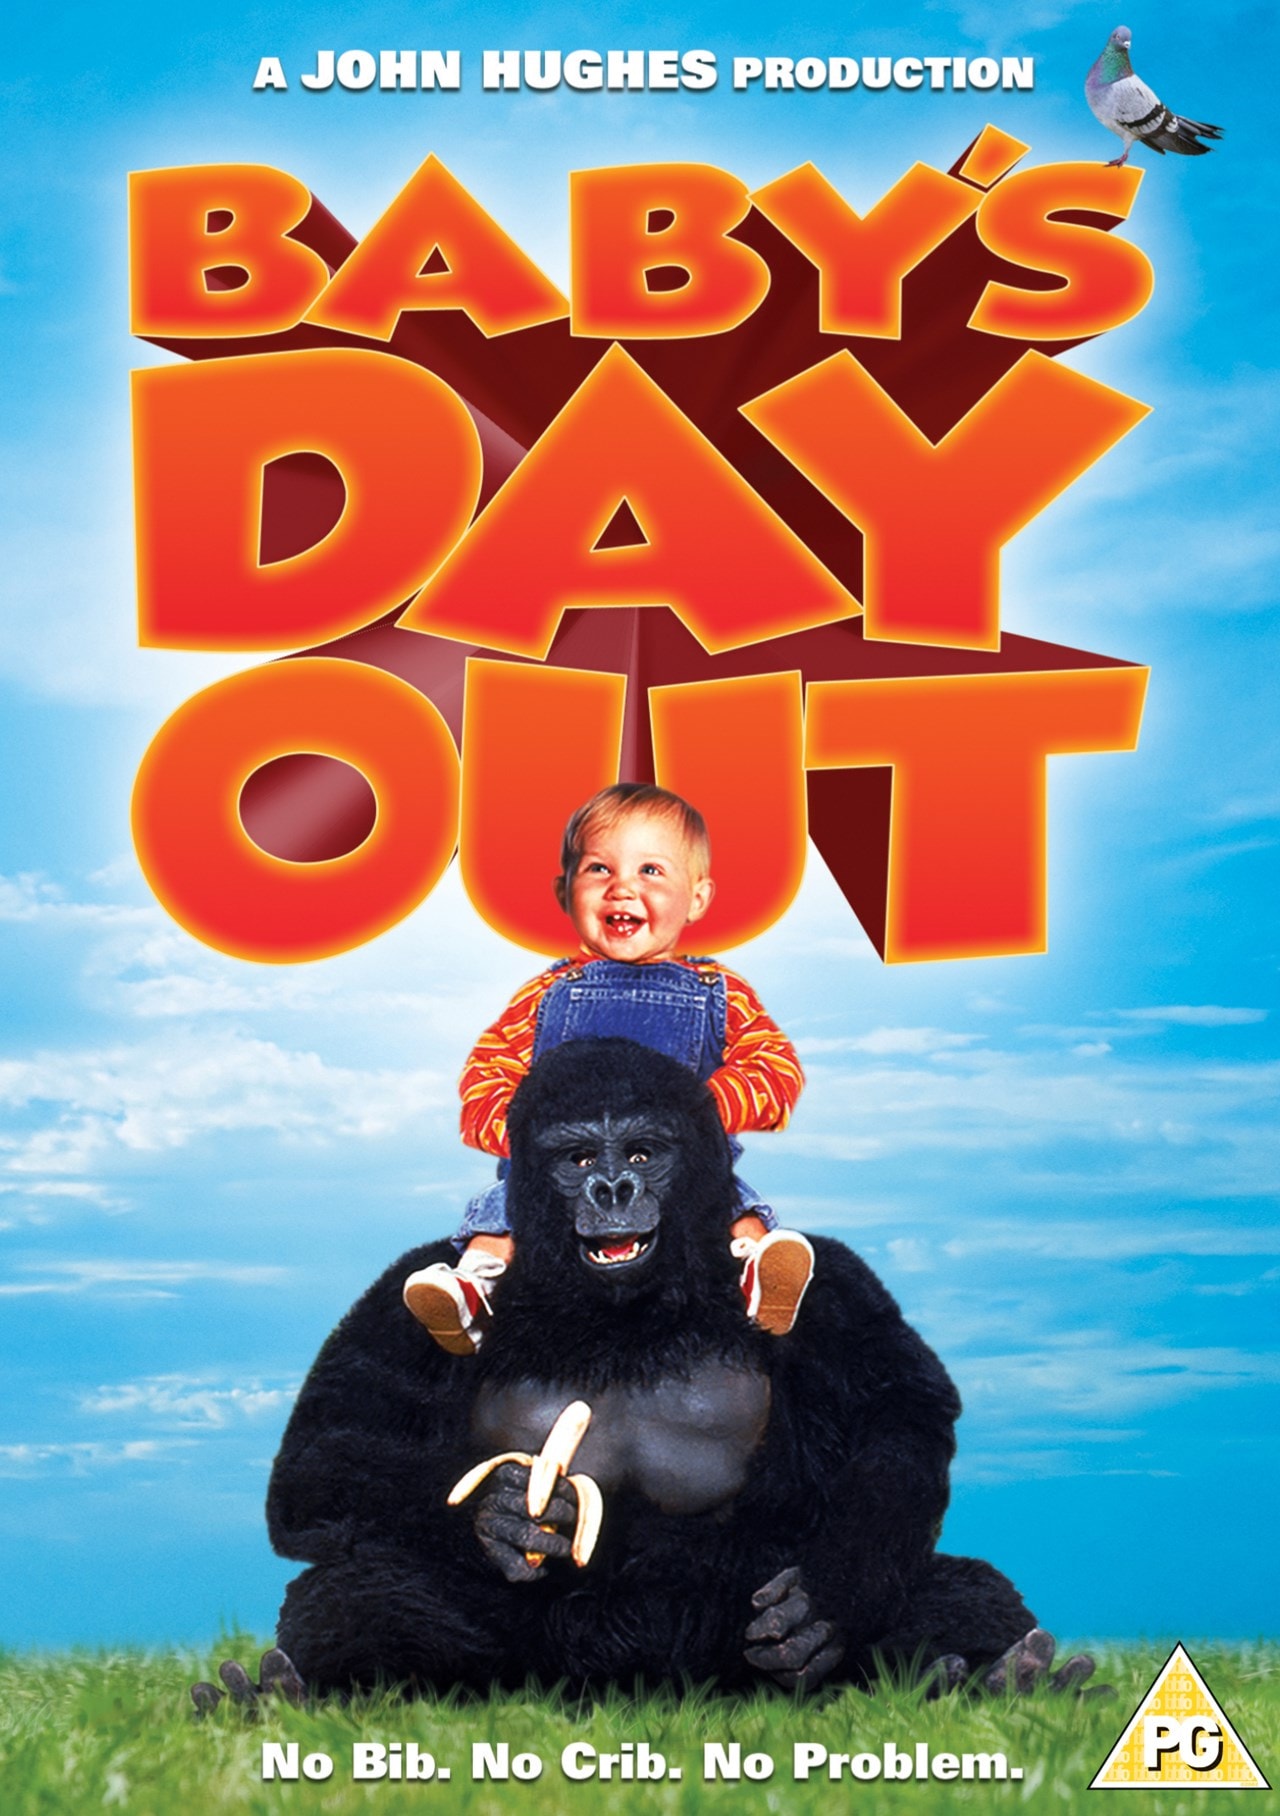 Baby's Day Out | DVD | Free shipping over £20 | HMV Store